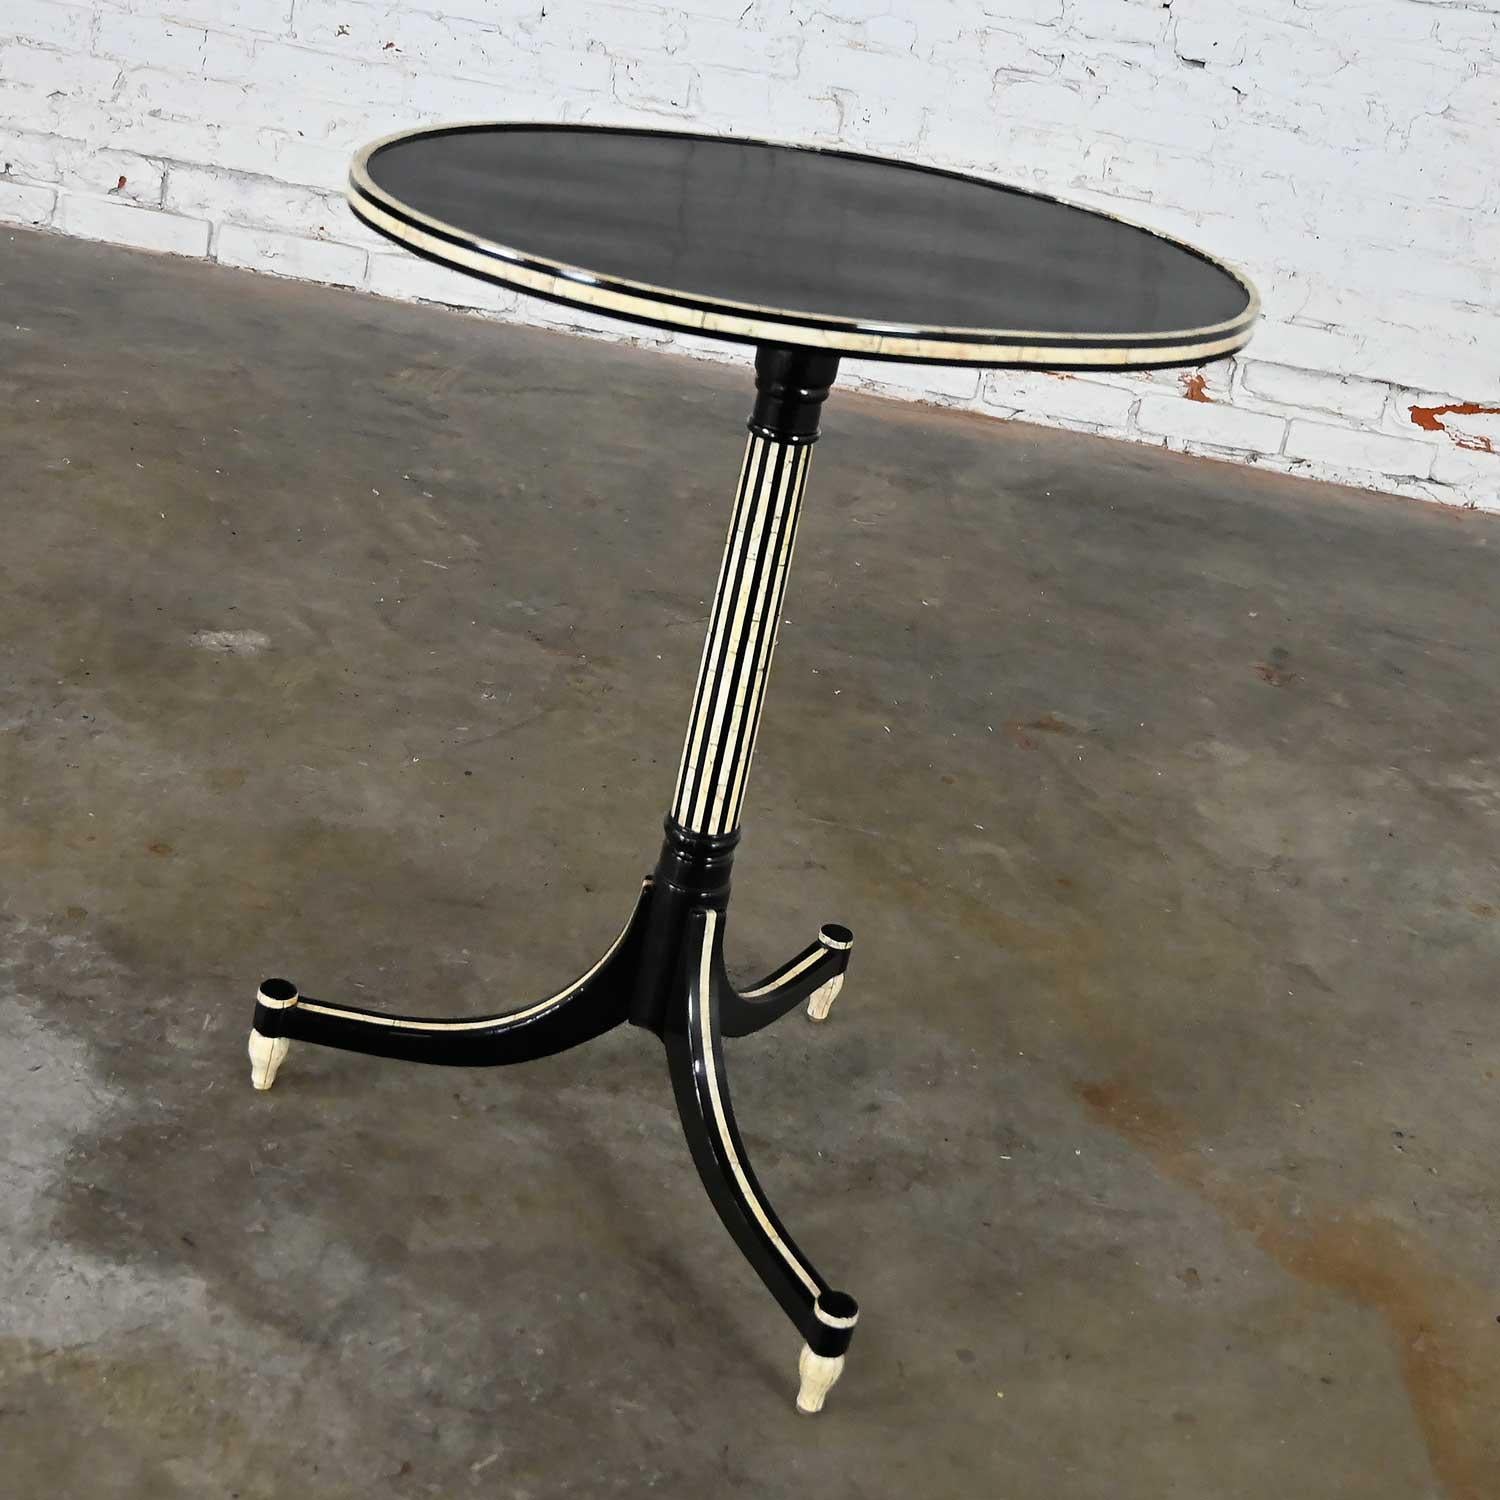 Unknown Neo-Classic Olive Oval Side Table Rose Tarlow Melrose House Ebony Black & White